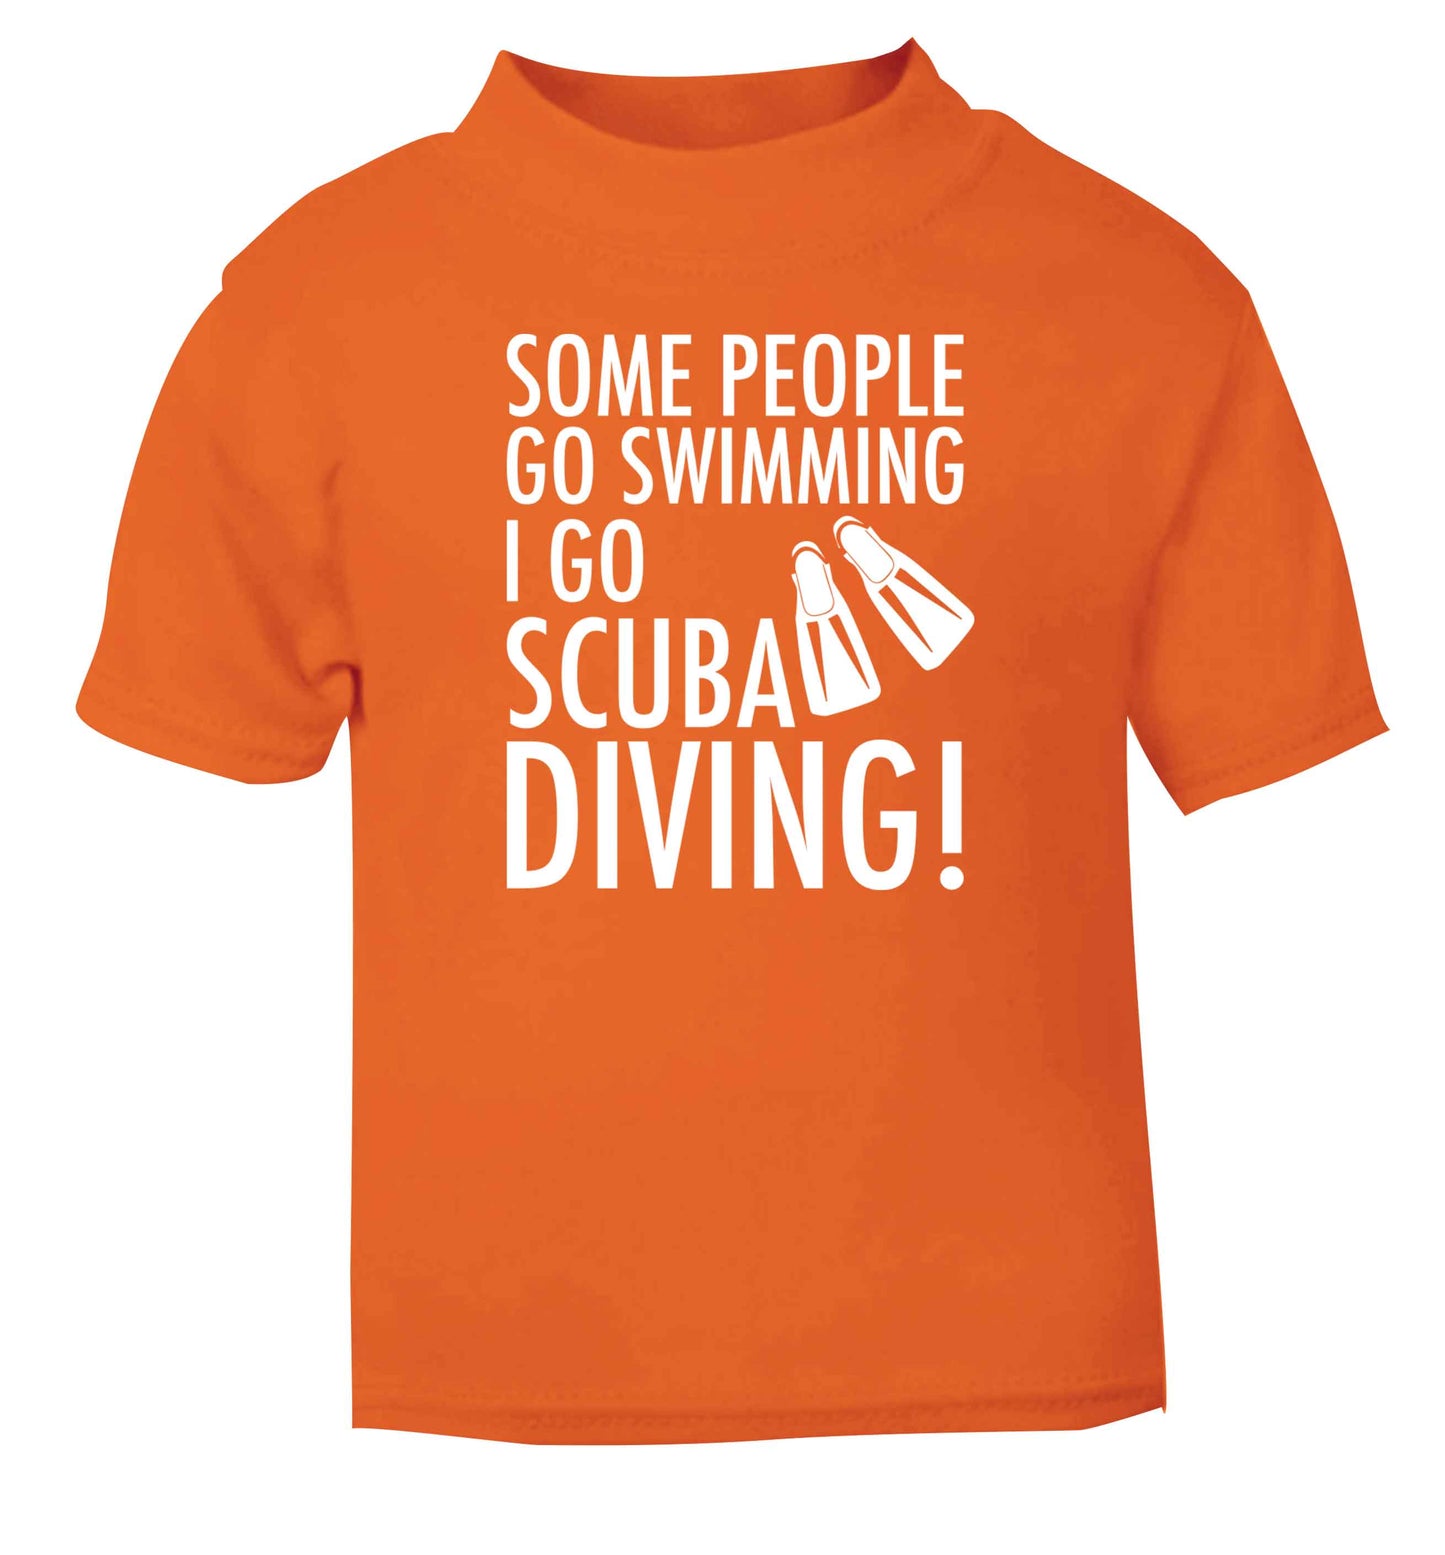 Some people go swimming I go scuba diving! orange Baby Toddler Tshirt 2 Years